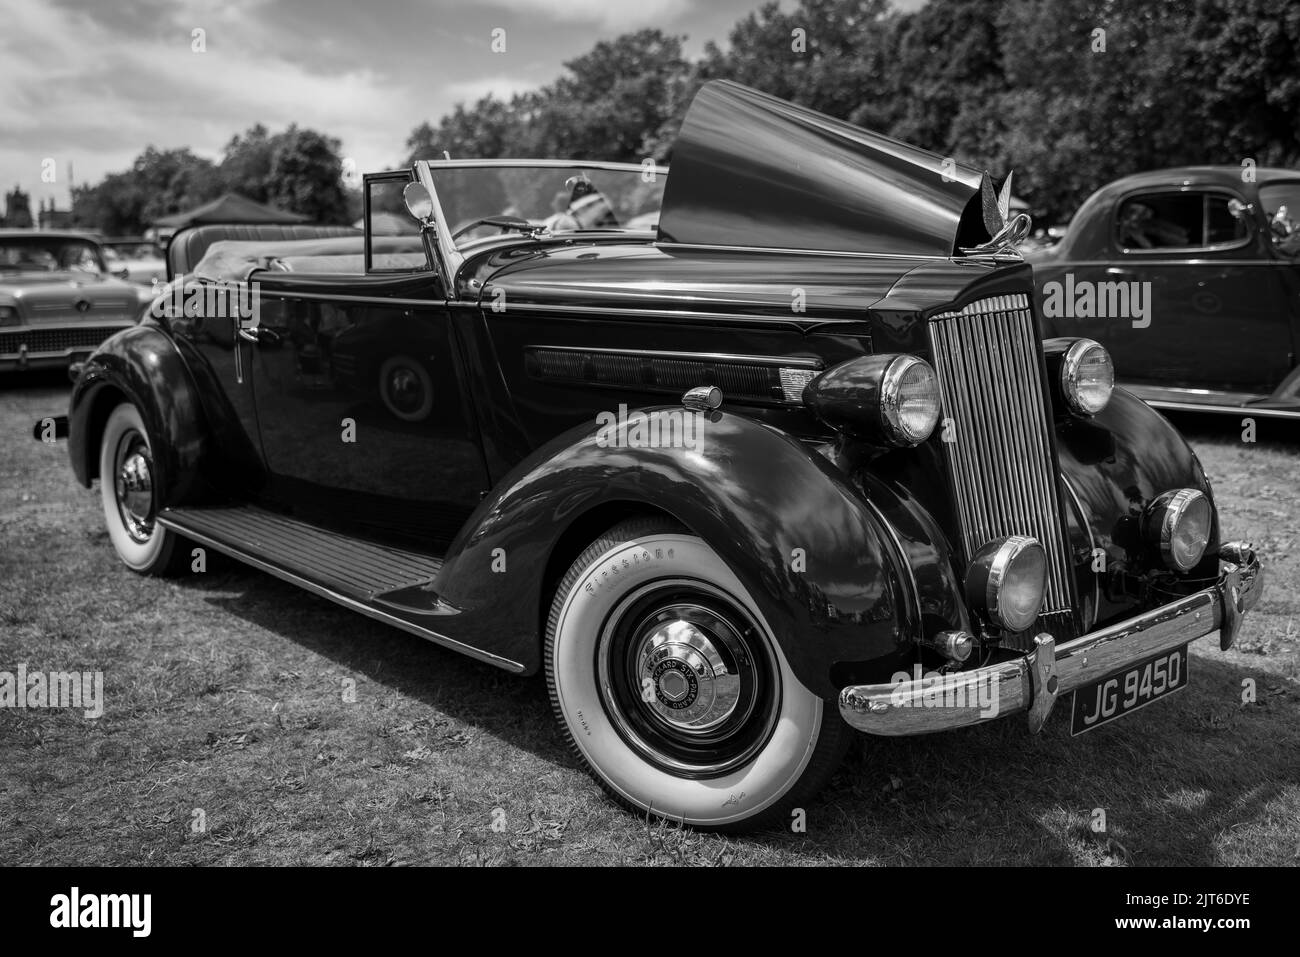 1937 PACKARD 115C ‘JG 9450’ on display at the American Auto Club Rally of the Giants, held at Blenheim Palace on the 10th July 2022 Stock Photo